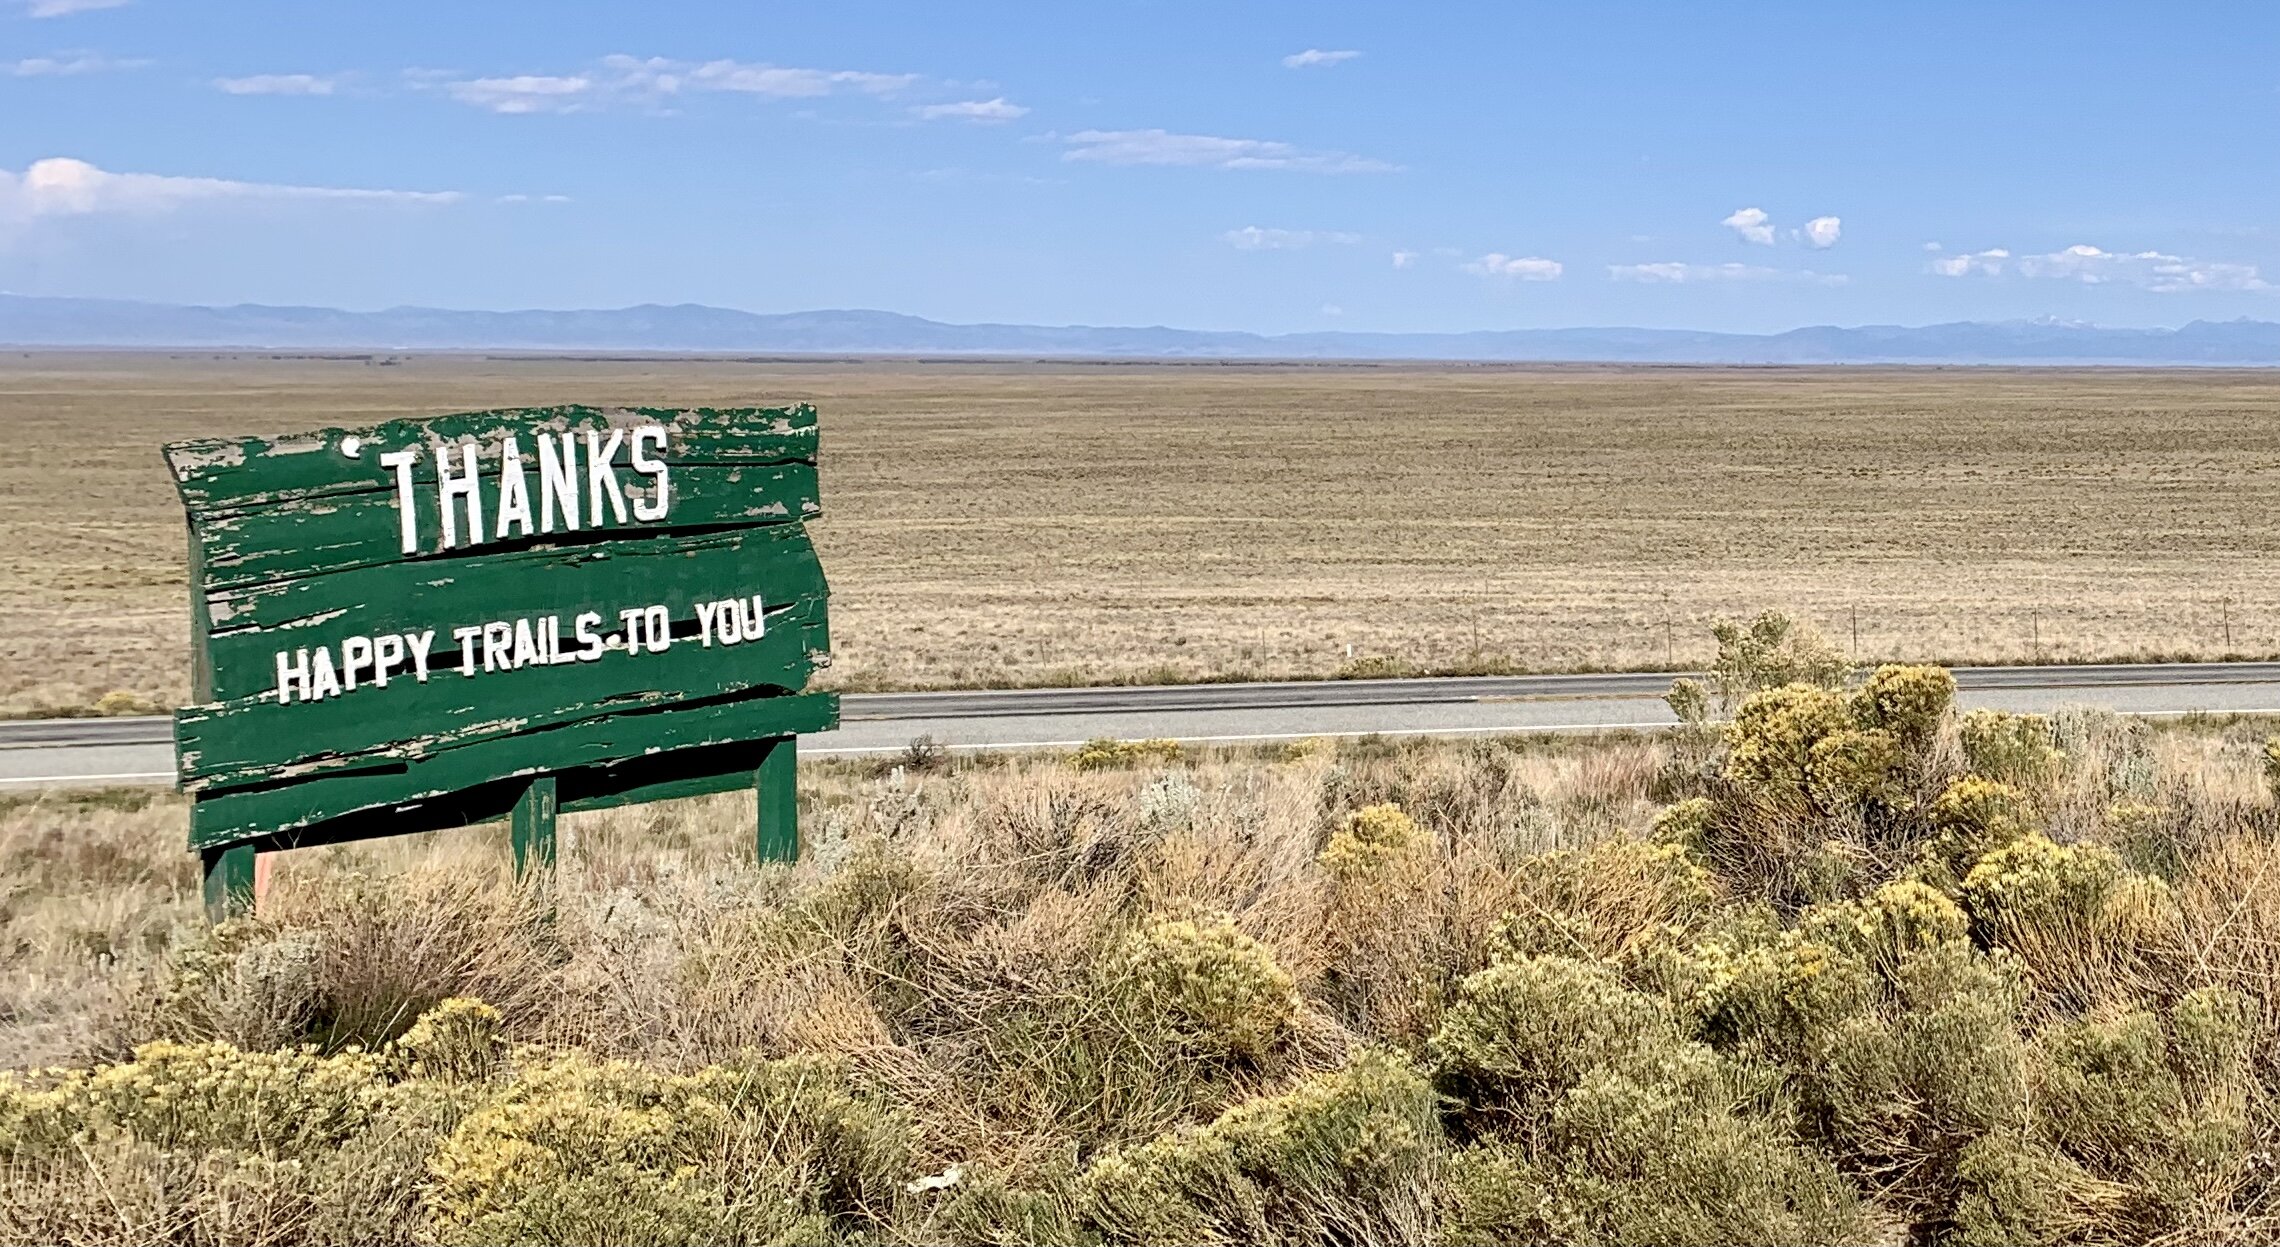  This sign outside our campground serves as a small indication of how remote and rugged the Great Sand Dunes National Park area is. 